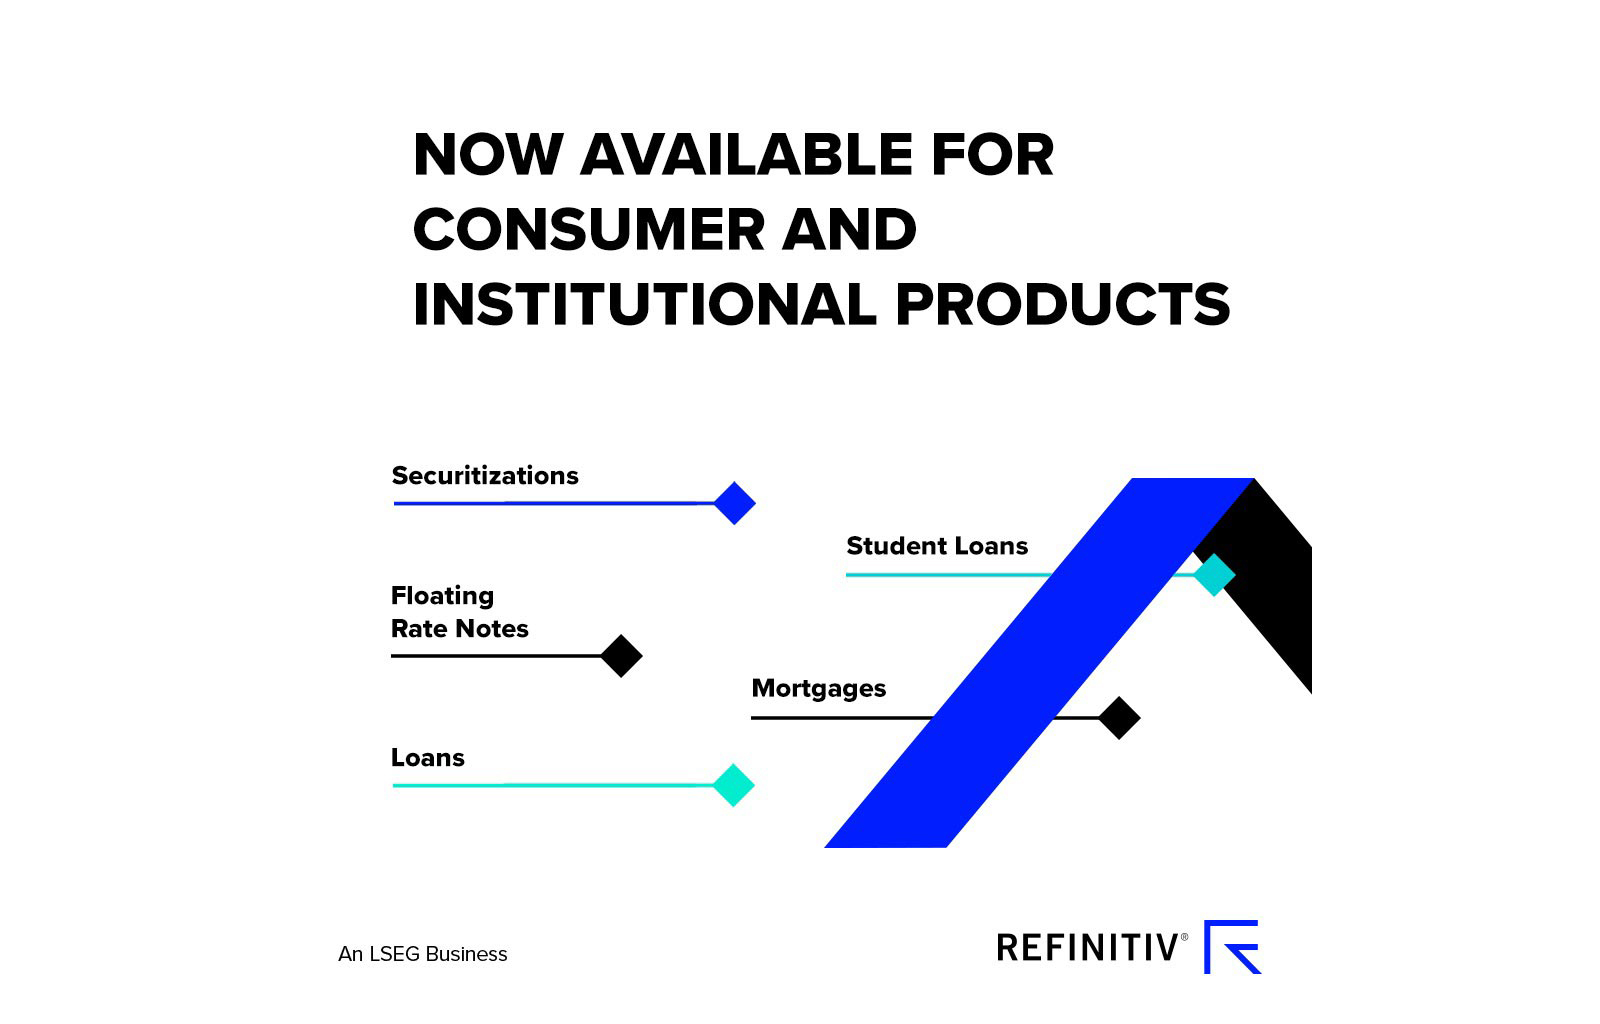 Now available for consumer and institutional products